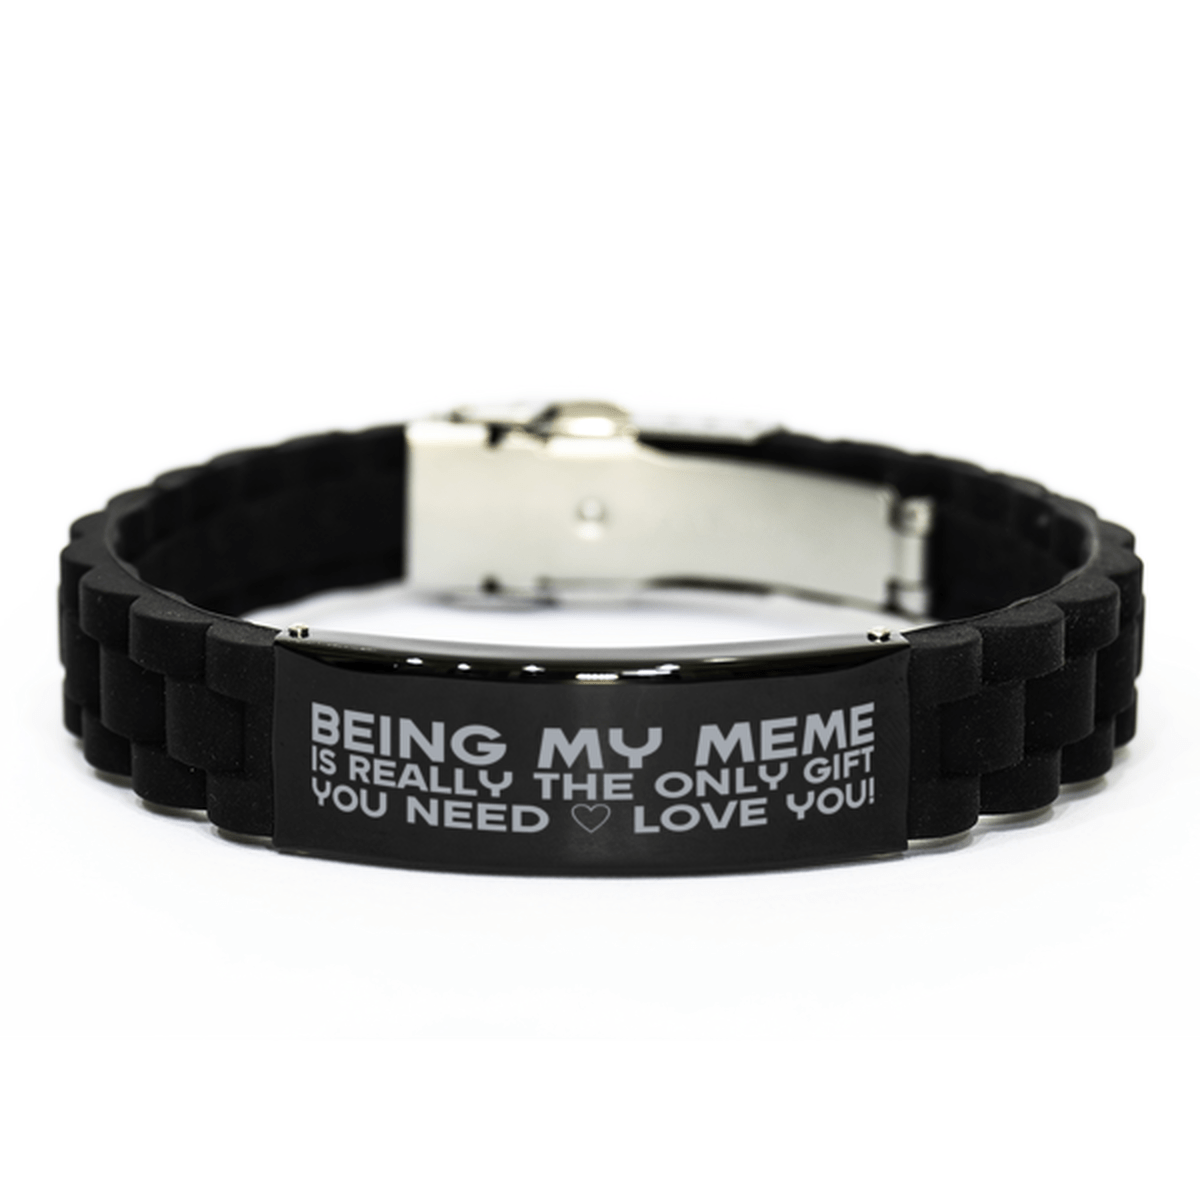 Funny Meme Bracelet, Being My Meme Is Really the Only Gift You Need, Best Birthday Gifts for Meme